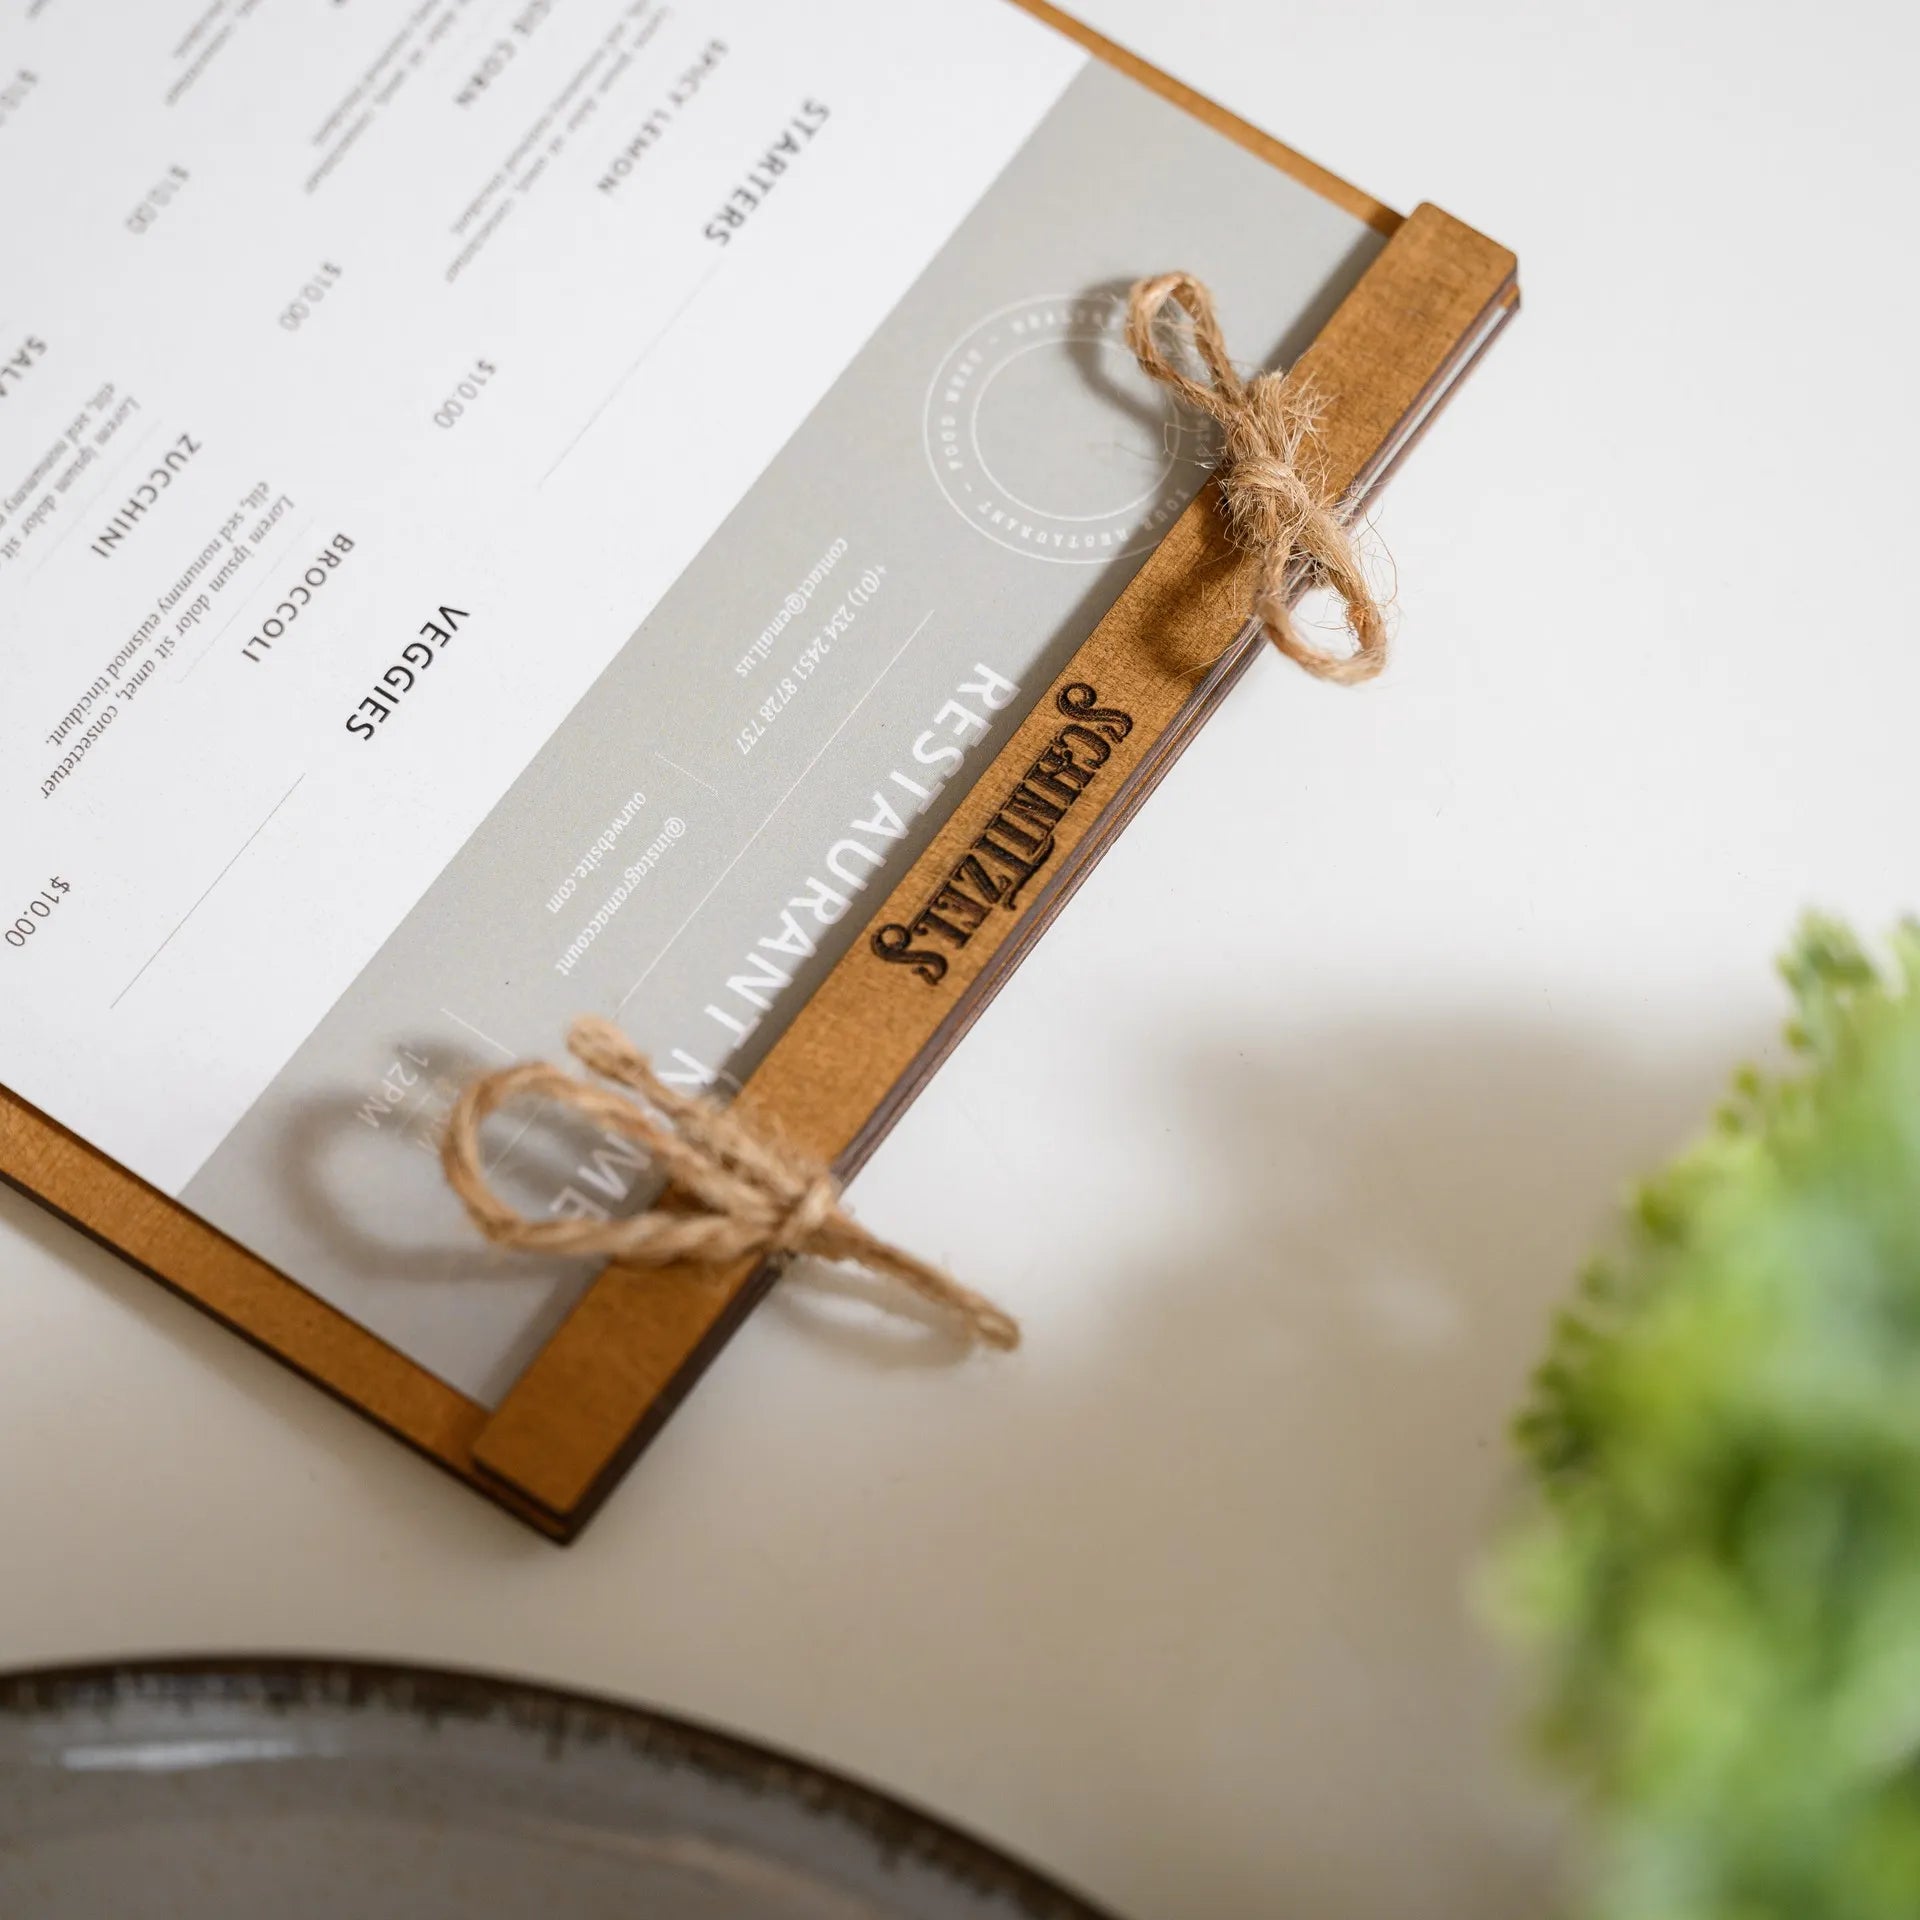 Wooden Menu Board with Fastening by Plank (P07A5)